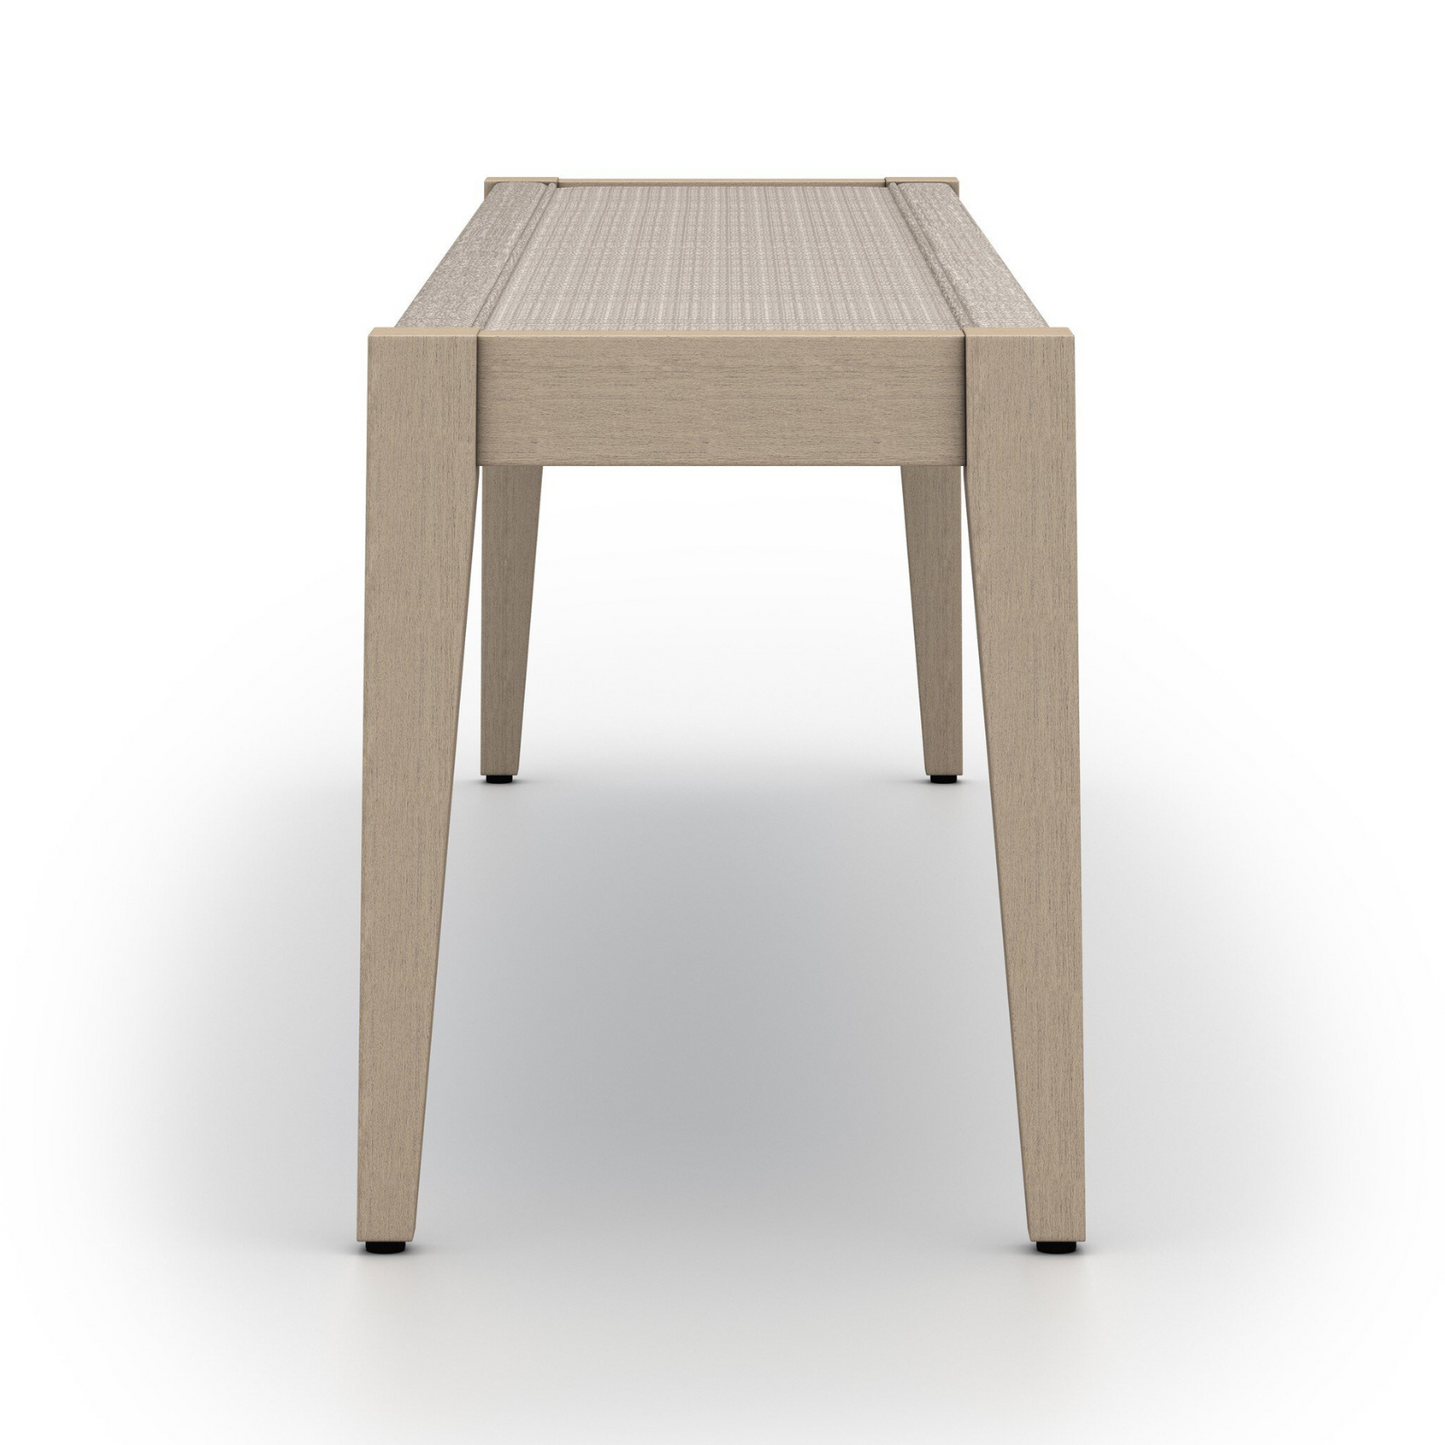 Sycamore Outdoor Dining Bench